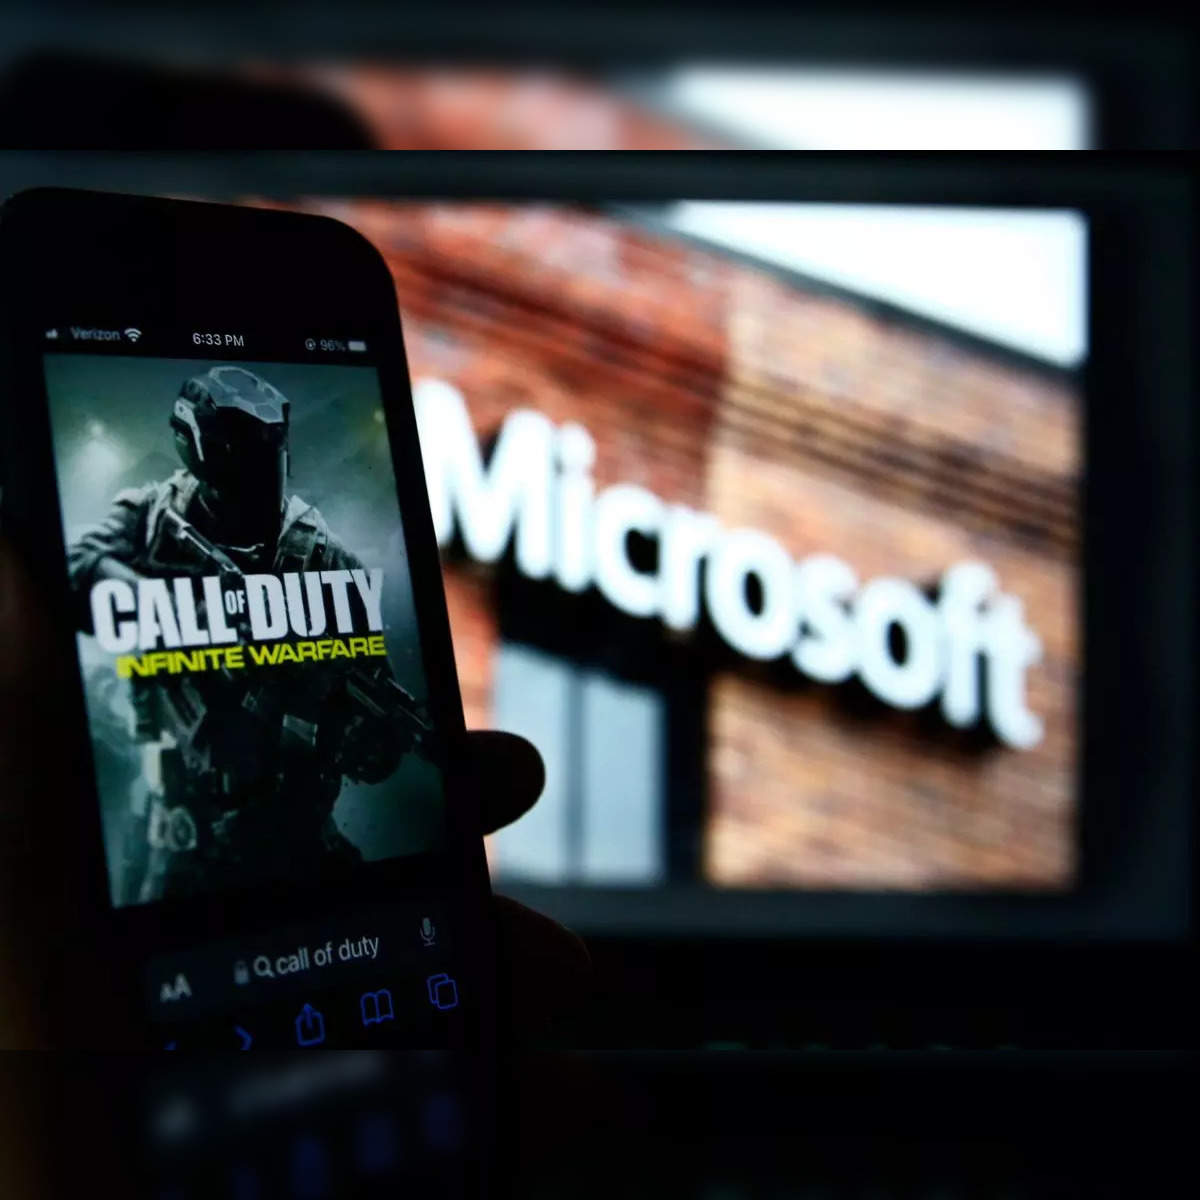 microsoft activision deal: Microsoft attempts to pick apart US legal  argument against deal to buy Activision - The Economic Times